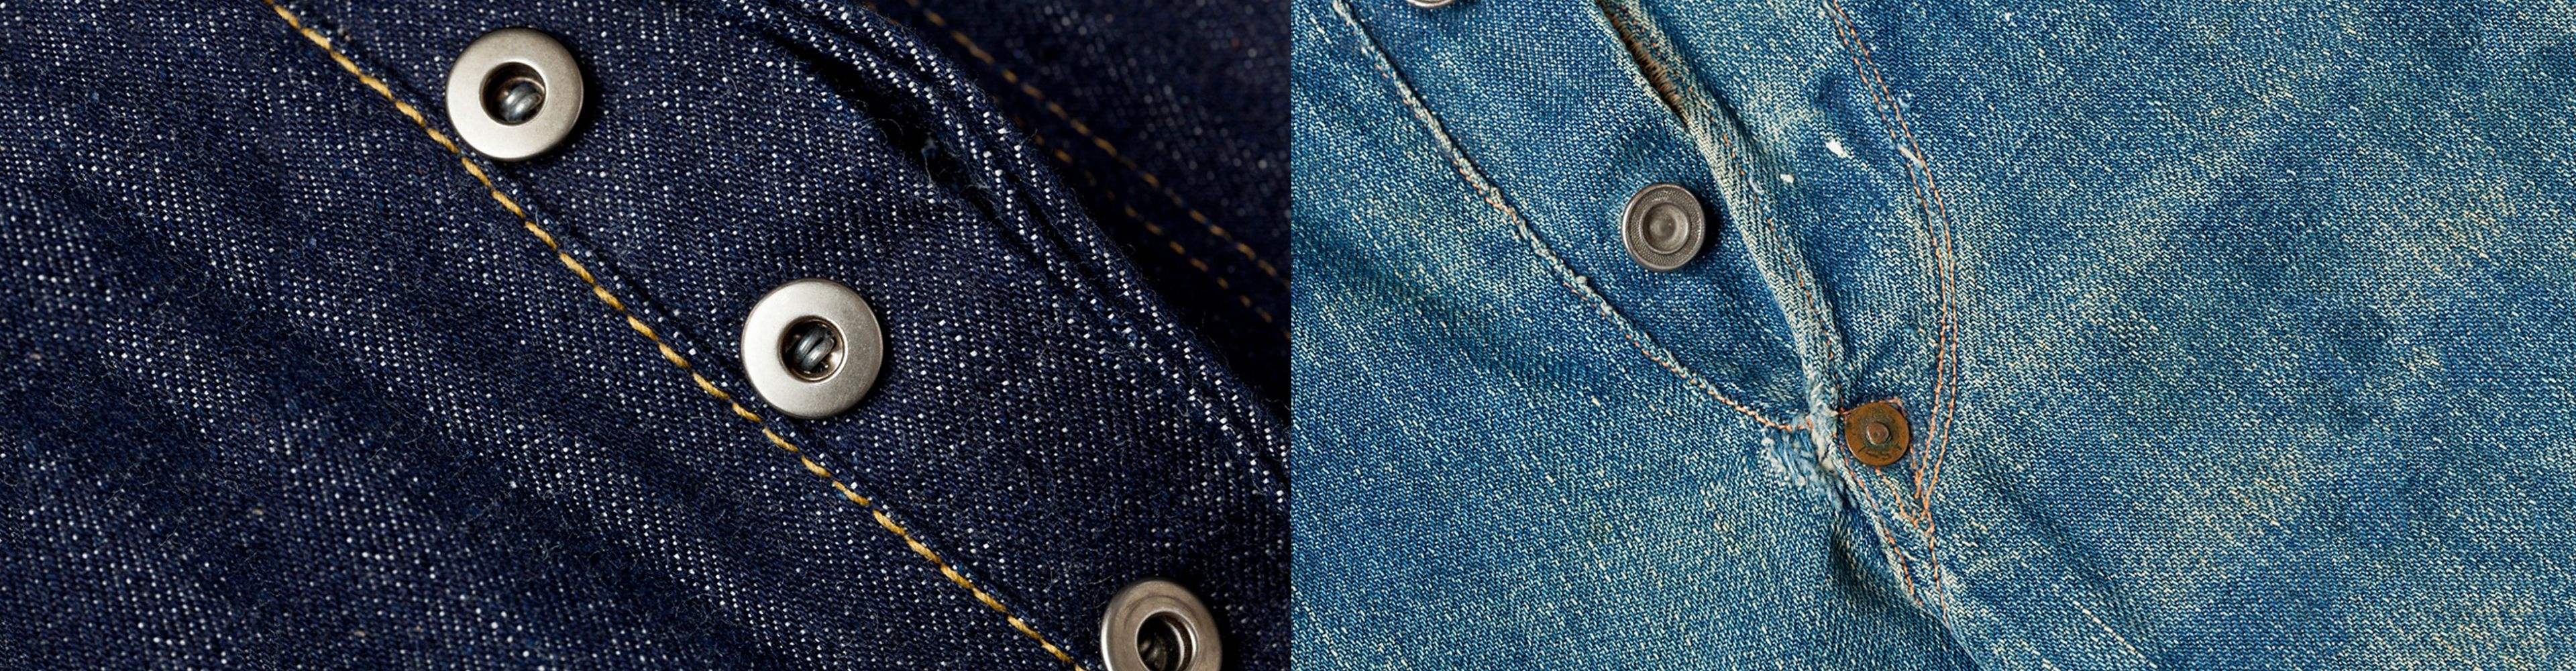 501® Jeans - Original, Vintage and New 